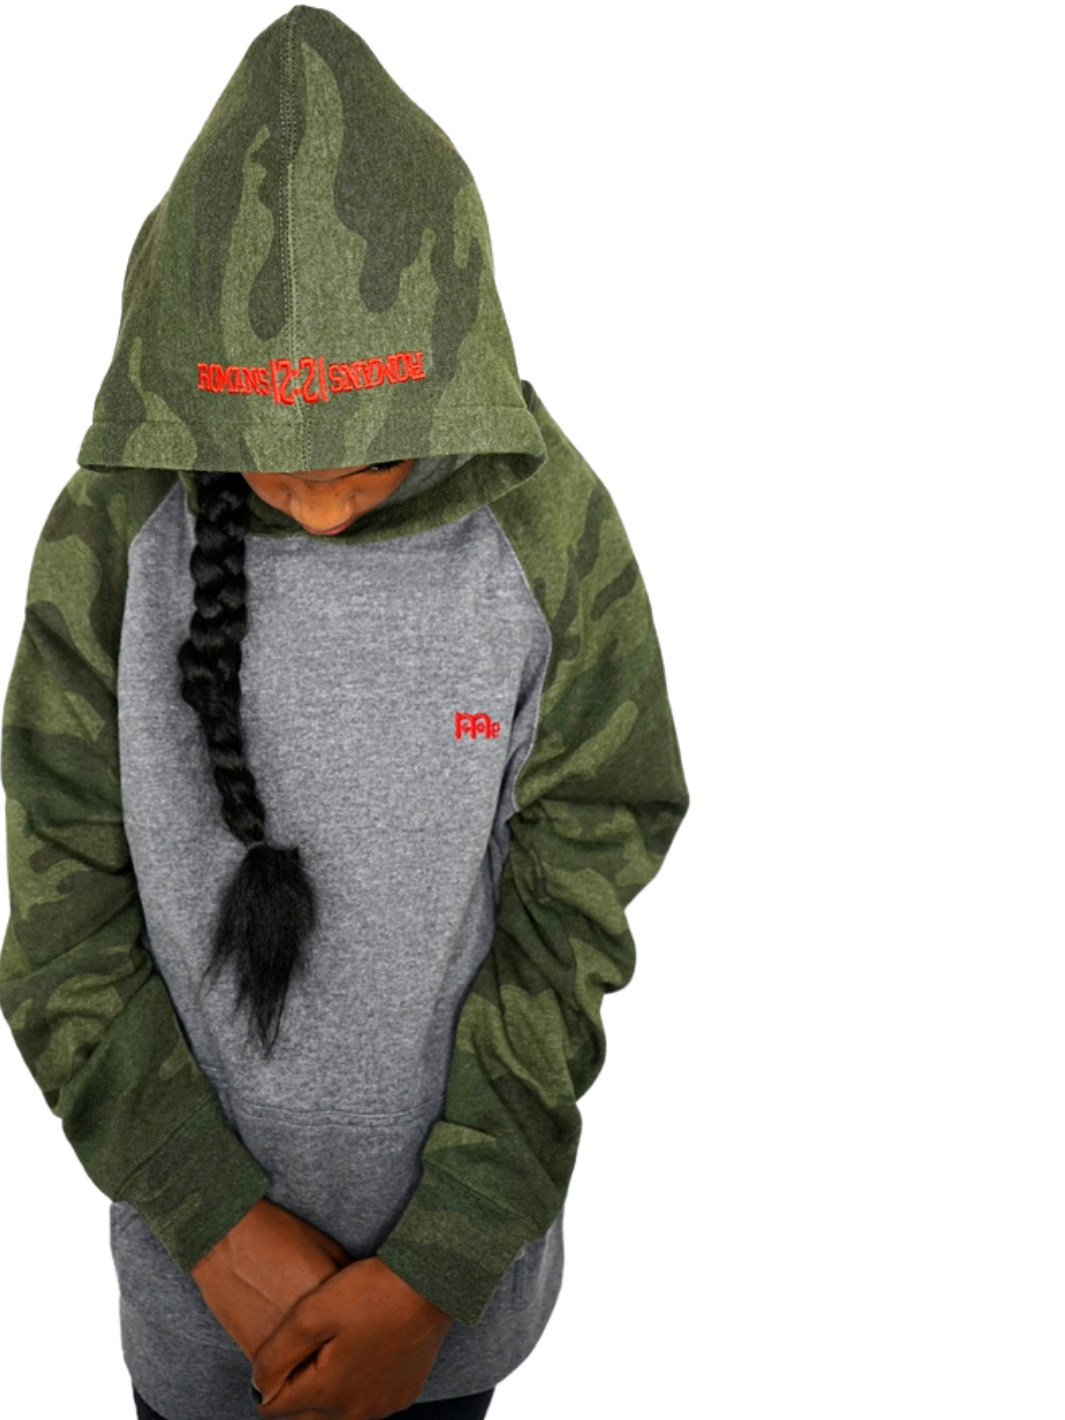 Youth Hoodie light Grey body with Green Camouflage hood and sleeves. Red logo at left chest and Romans 12 : 21 on hood. Sizes 6 to 16